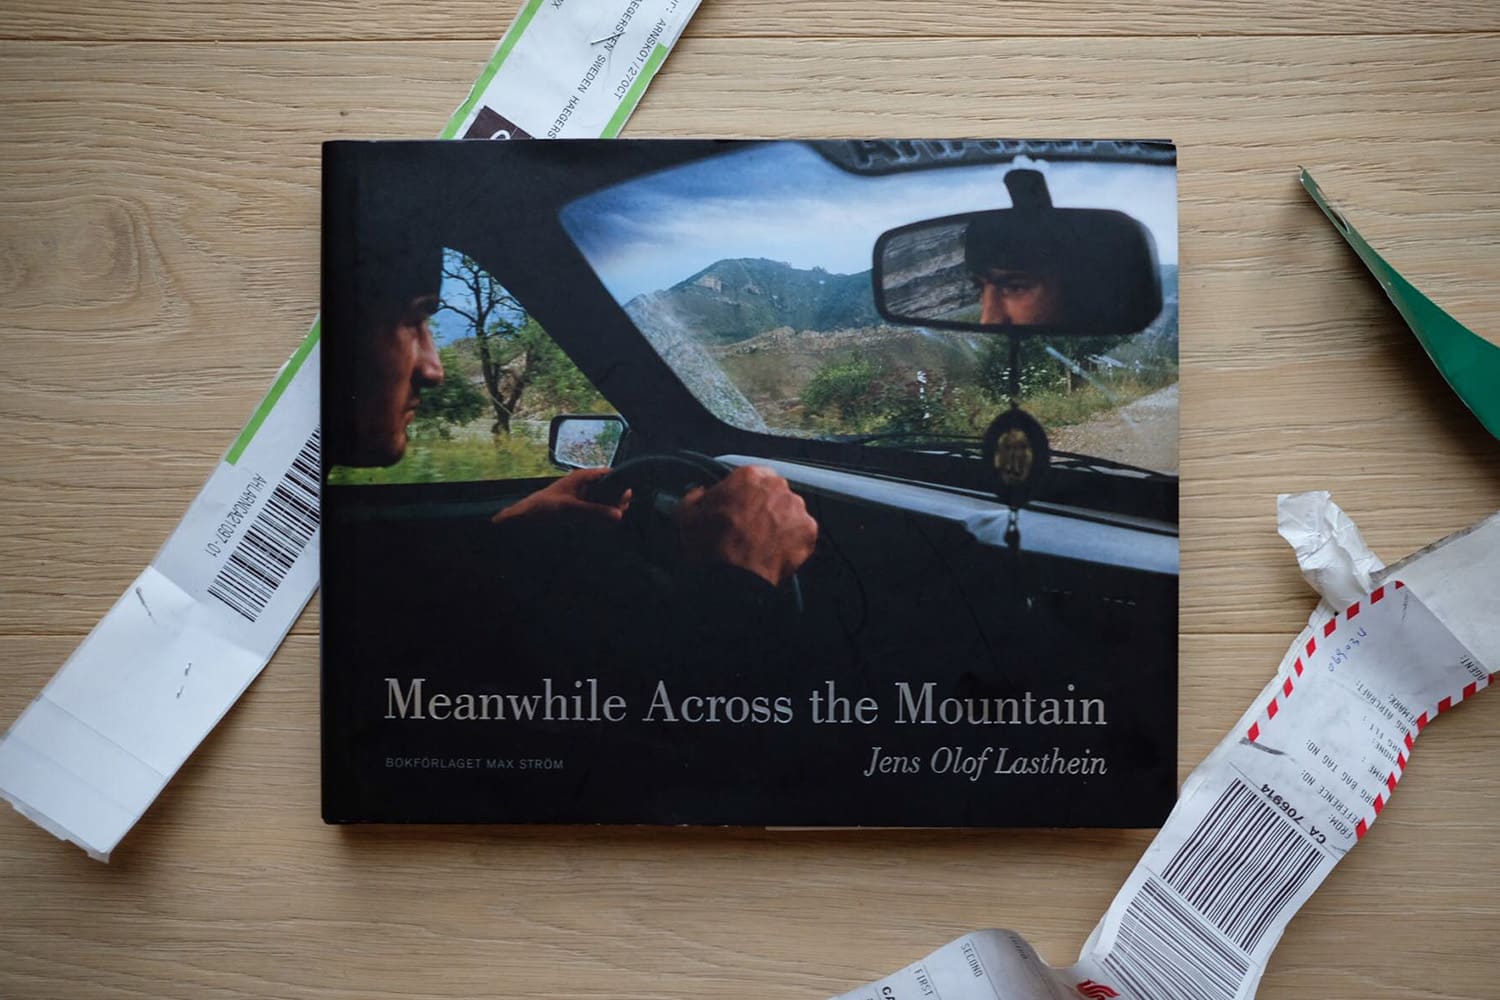 Jesse’s Book Review – “Meanwhile Across the Mountain” by Jens Olof Lasthein